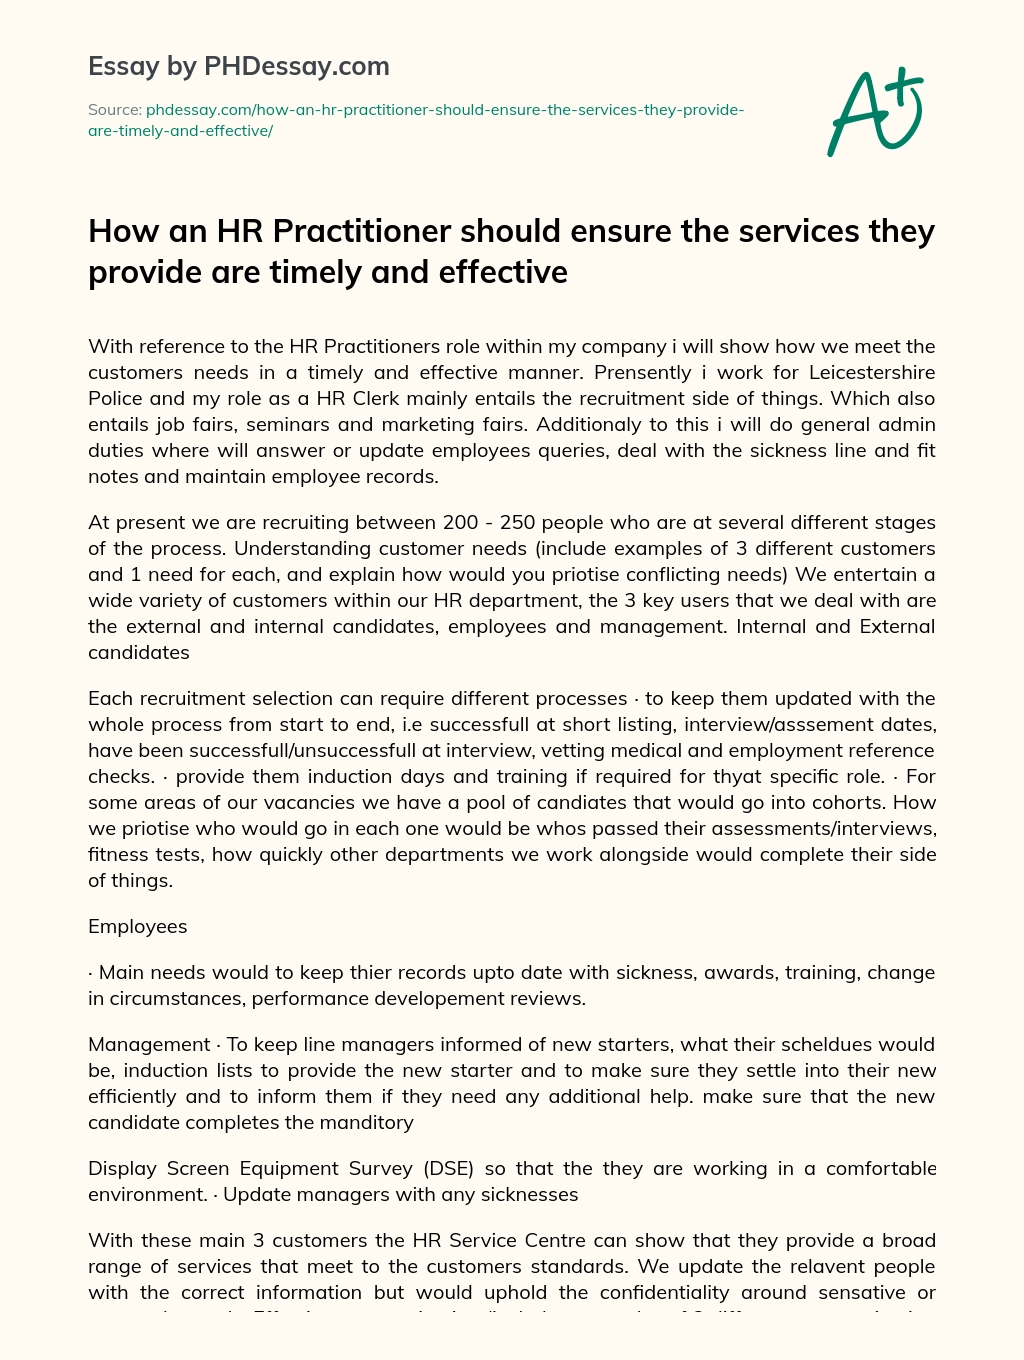 How an HR Practitioner should ensure the services they provide are timely and effective essay